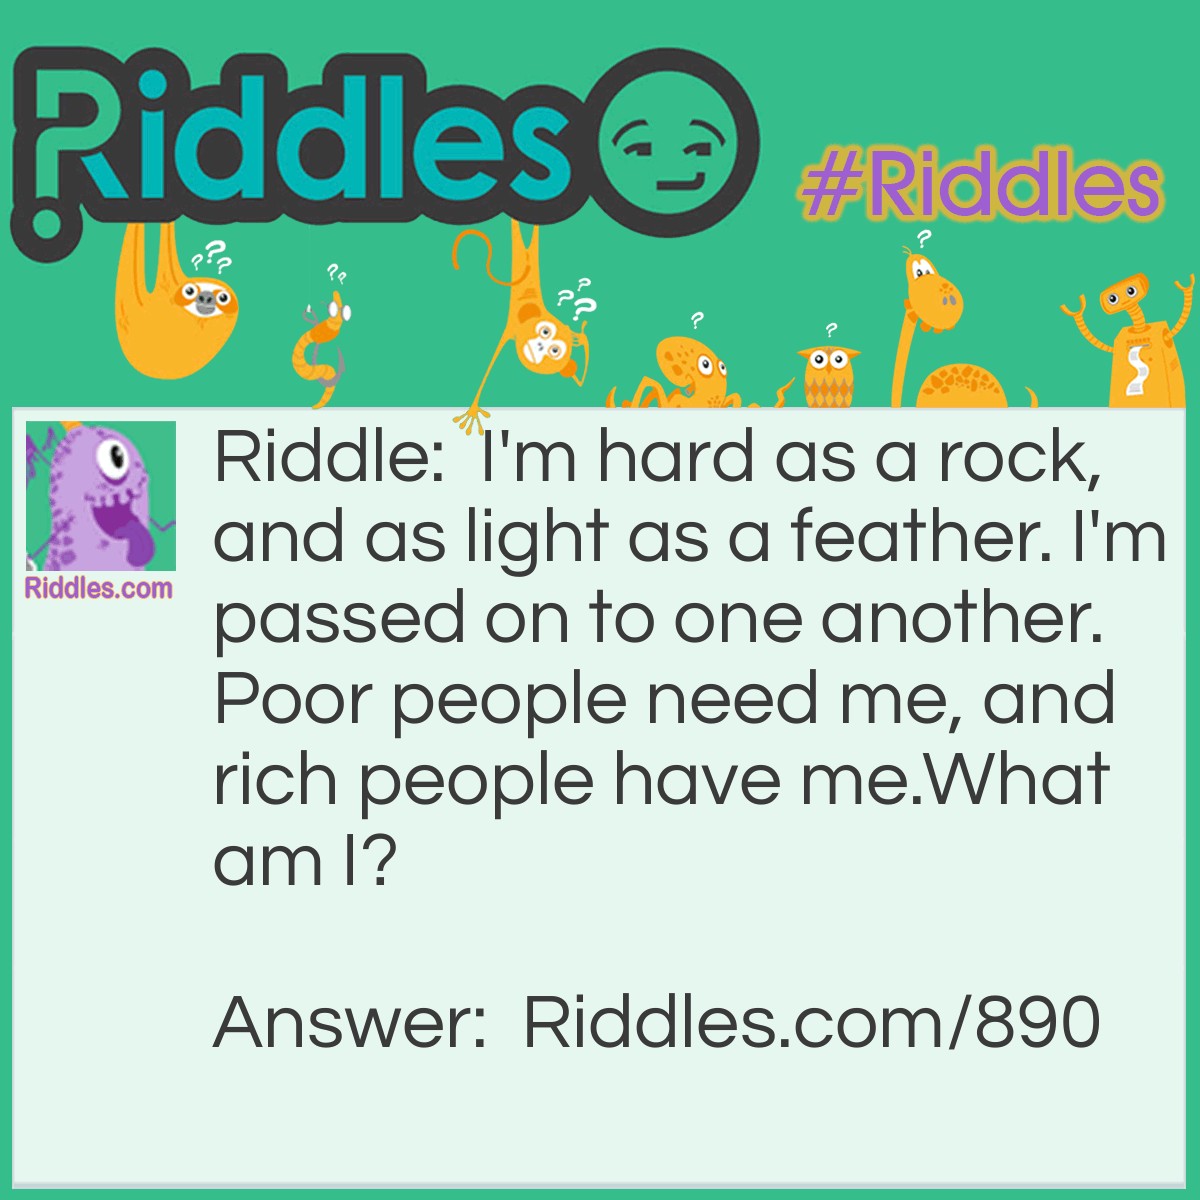 Riddle: I'm hard as a rock, and as light as a feather. I'm passed on to one another. Poor people need me, and rich people have me.
What am I? Answer: Money.